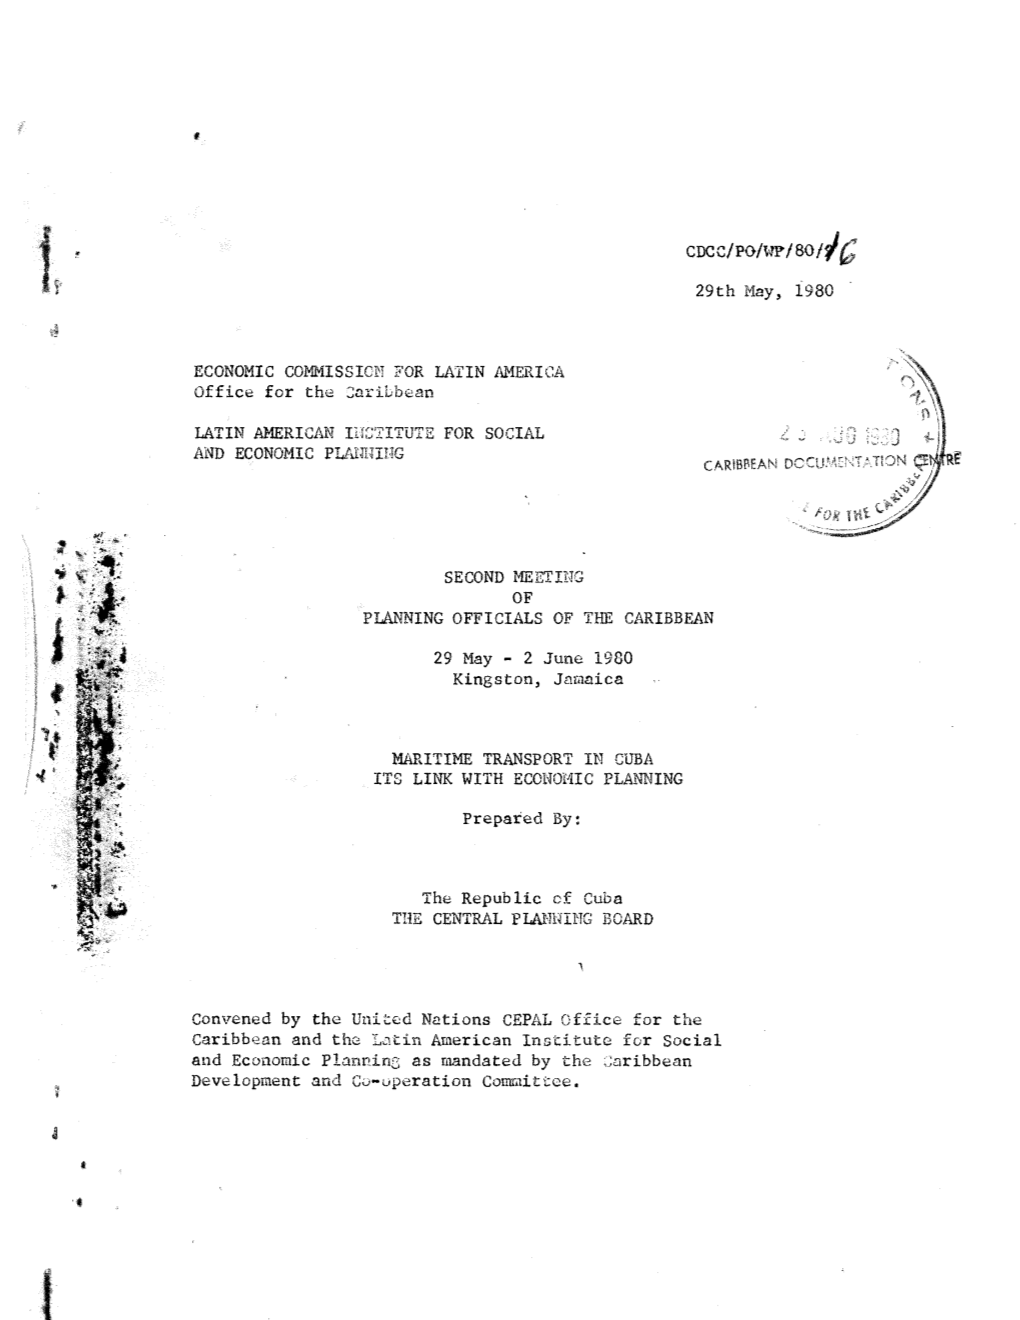 CDCC/PO/WP/80/^ 29Th May, 1980 ECONOMIC COMMISSION for LATIN Americi Office for the Caribbean LATIN AMERICAN INSTITUTE for SOCIA